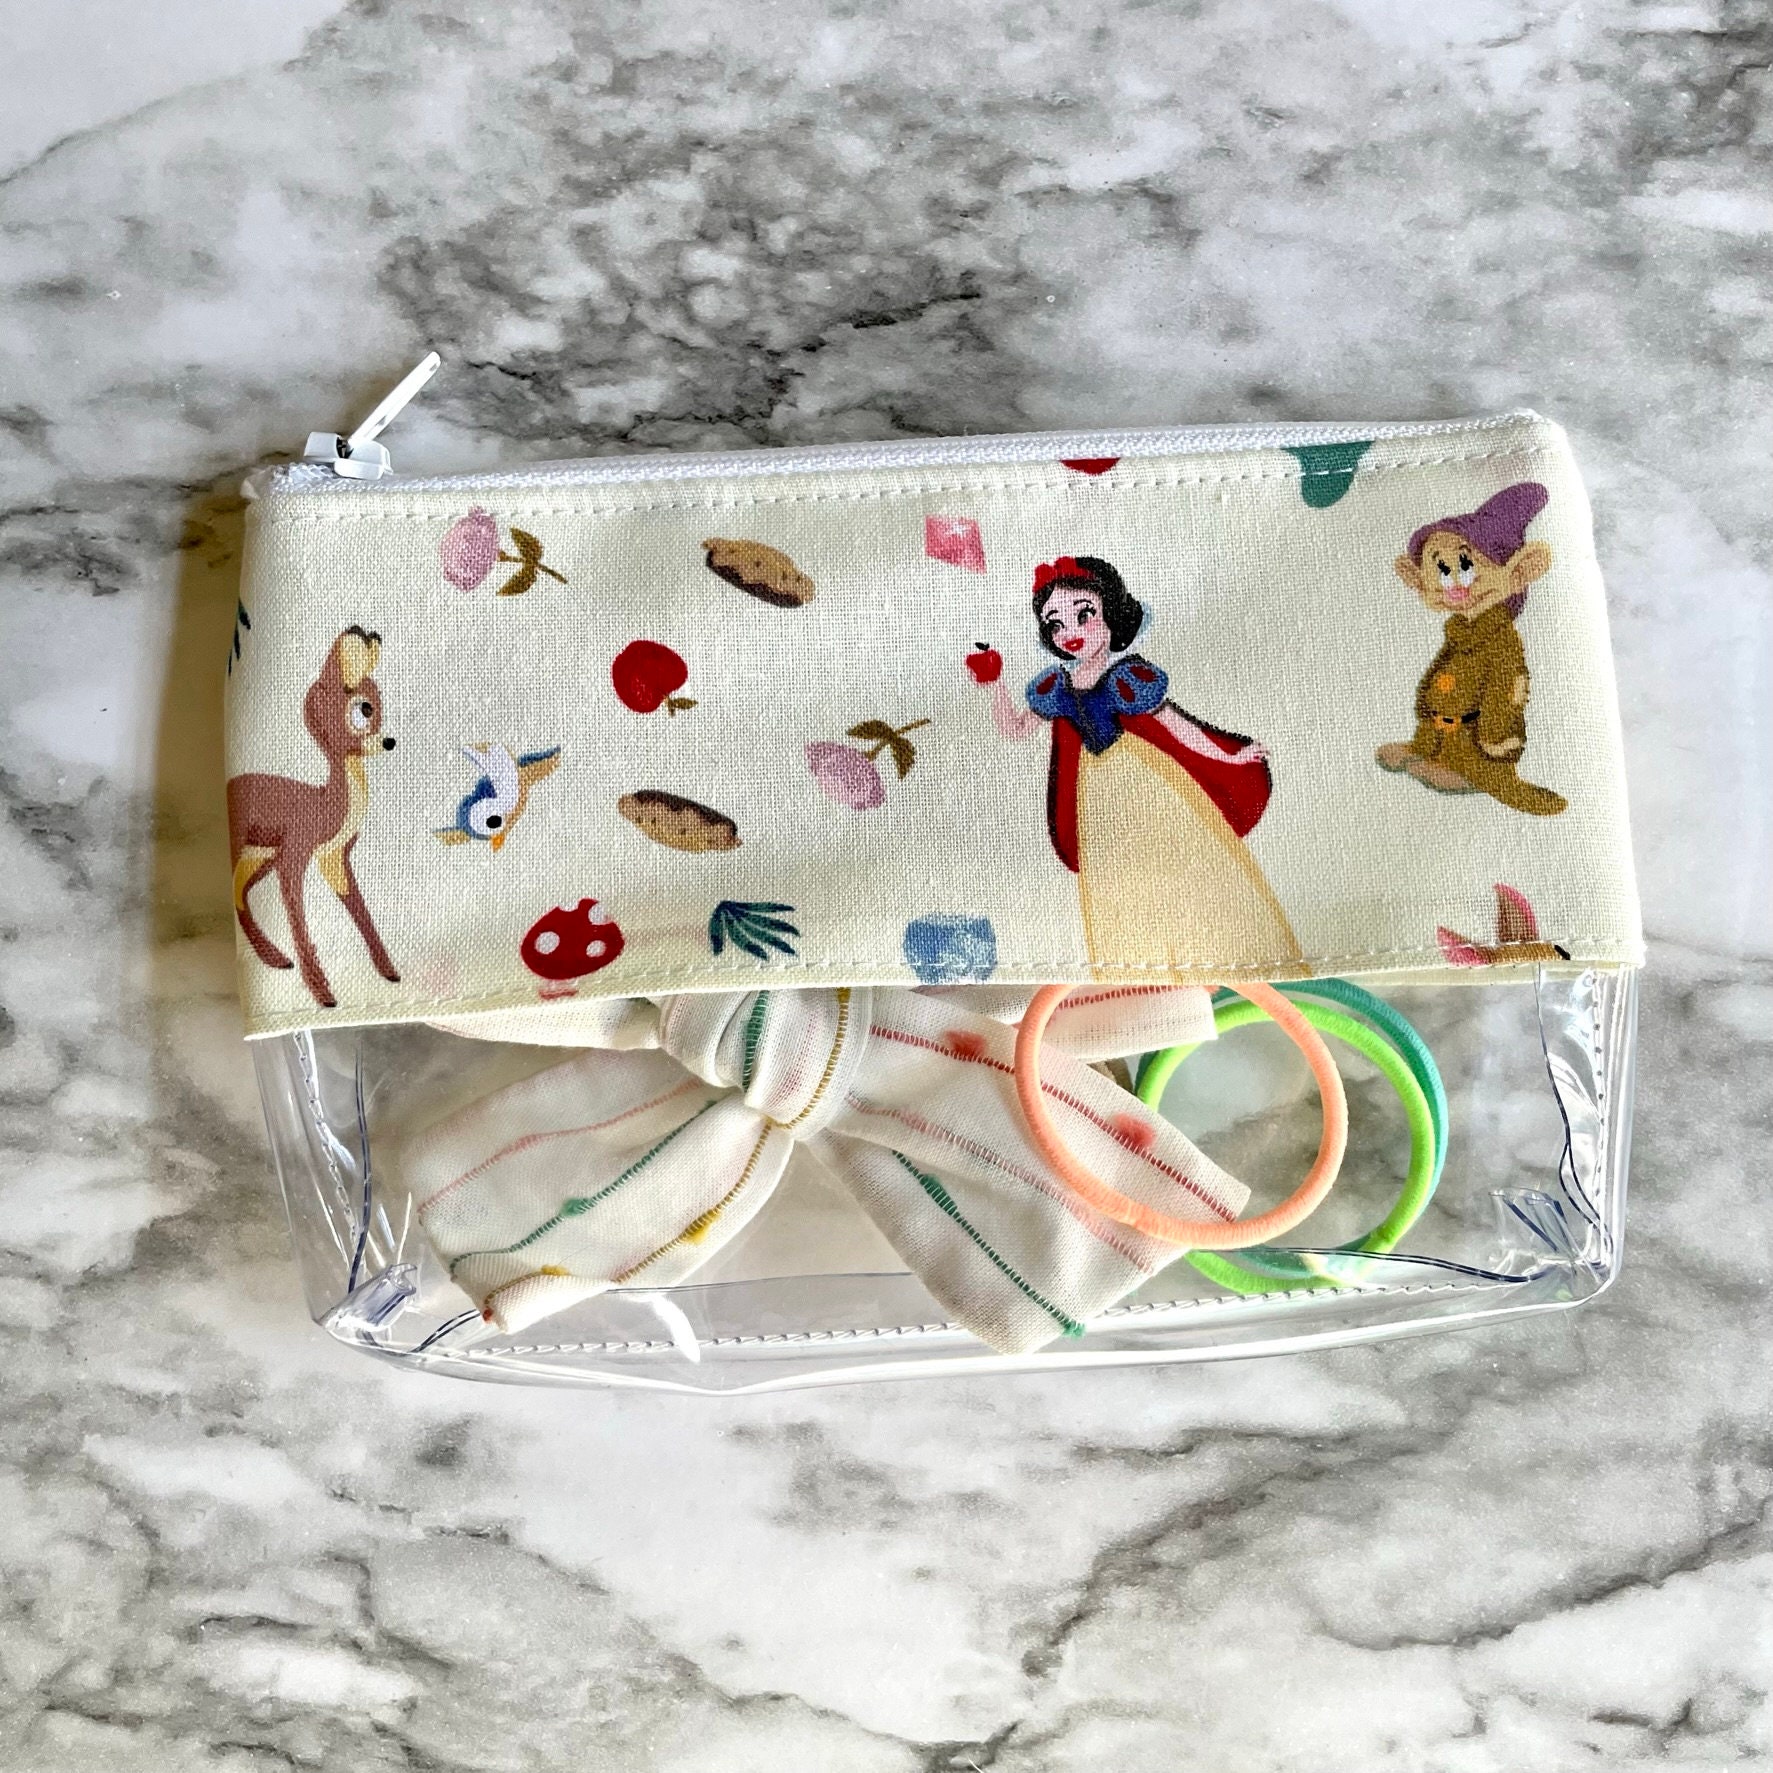 Amazon.com : MAD Beauty Disney Princess Snow White Cosmetic Bag, “Living My  Best Life Make-Up Pouch, Snow White and the Seven Dwarfs, Toiletries,  Beauty Bag, Travel Pouch, Lovely Gift for Disney Princess